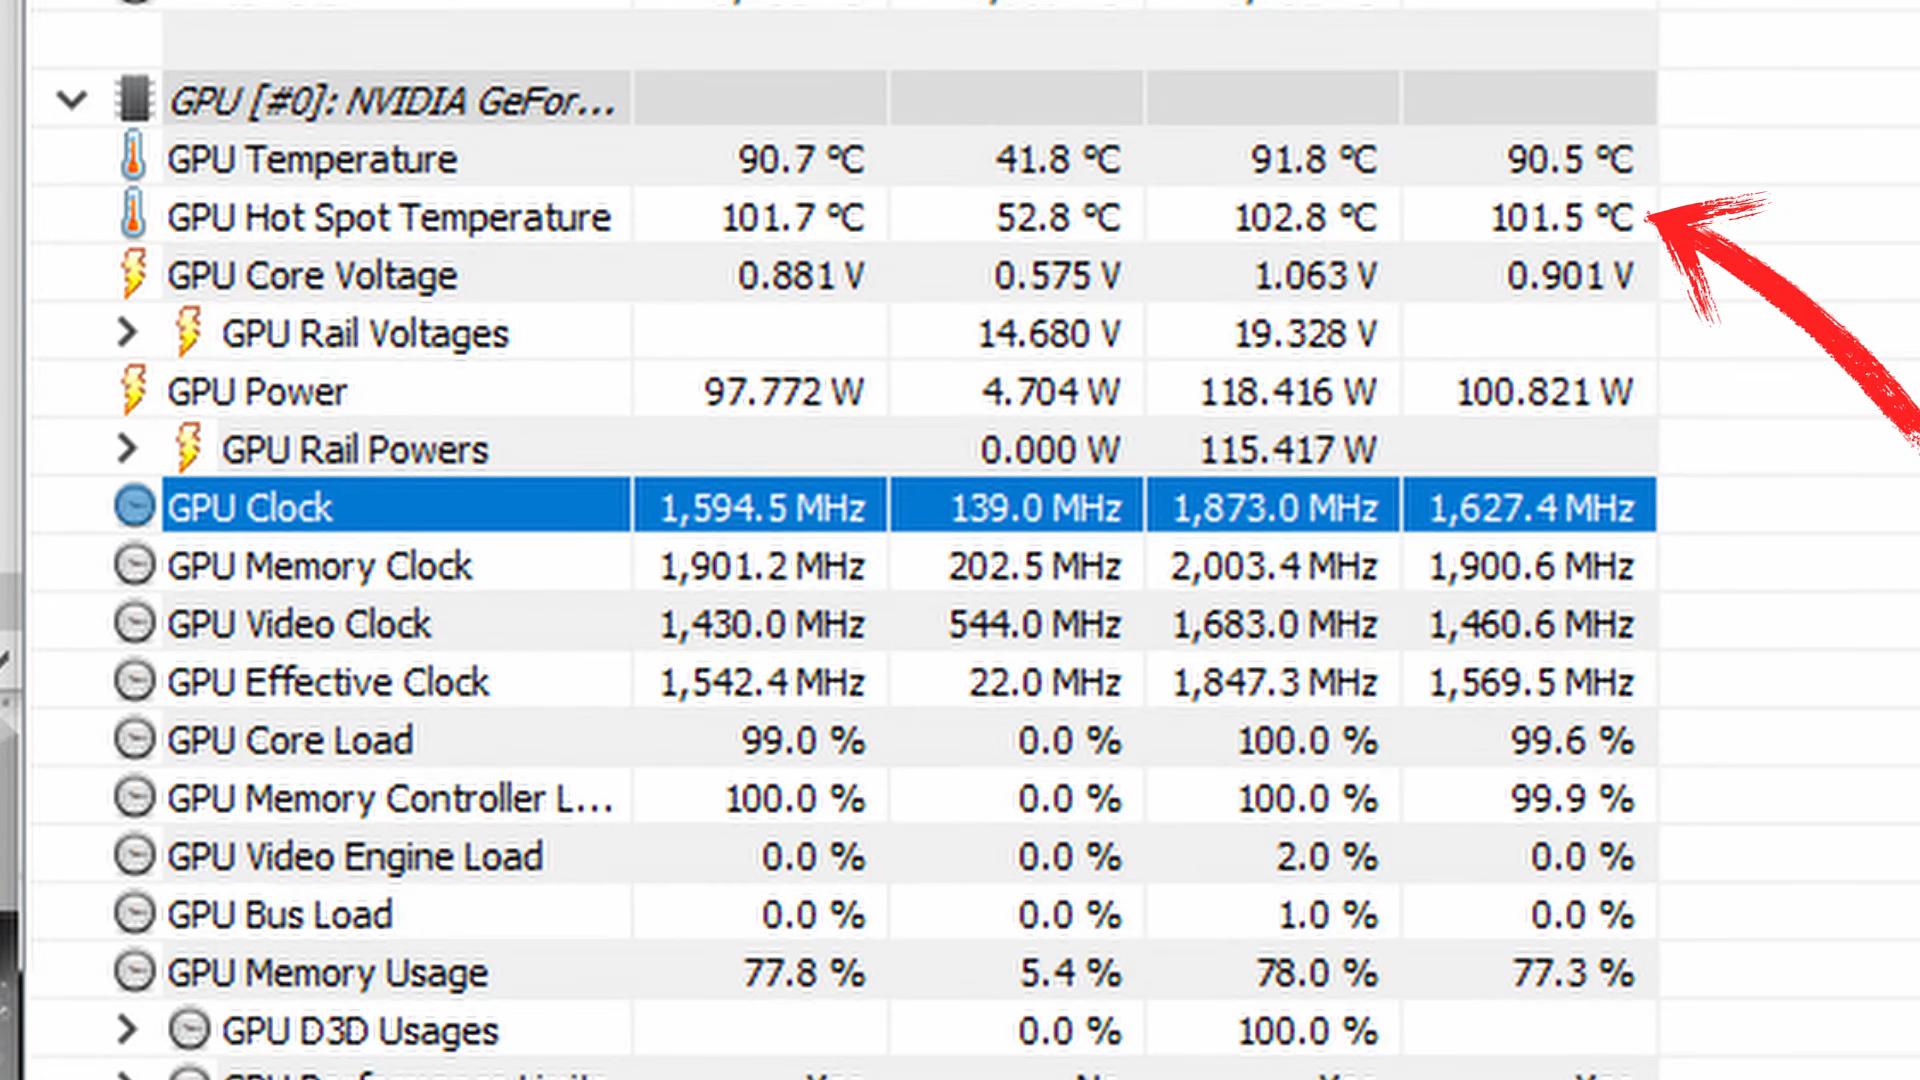 For How Long Can My PC Work Safely While Over 85°C